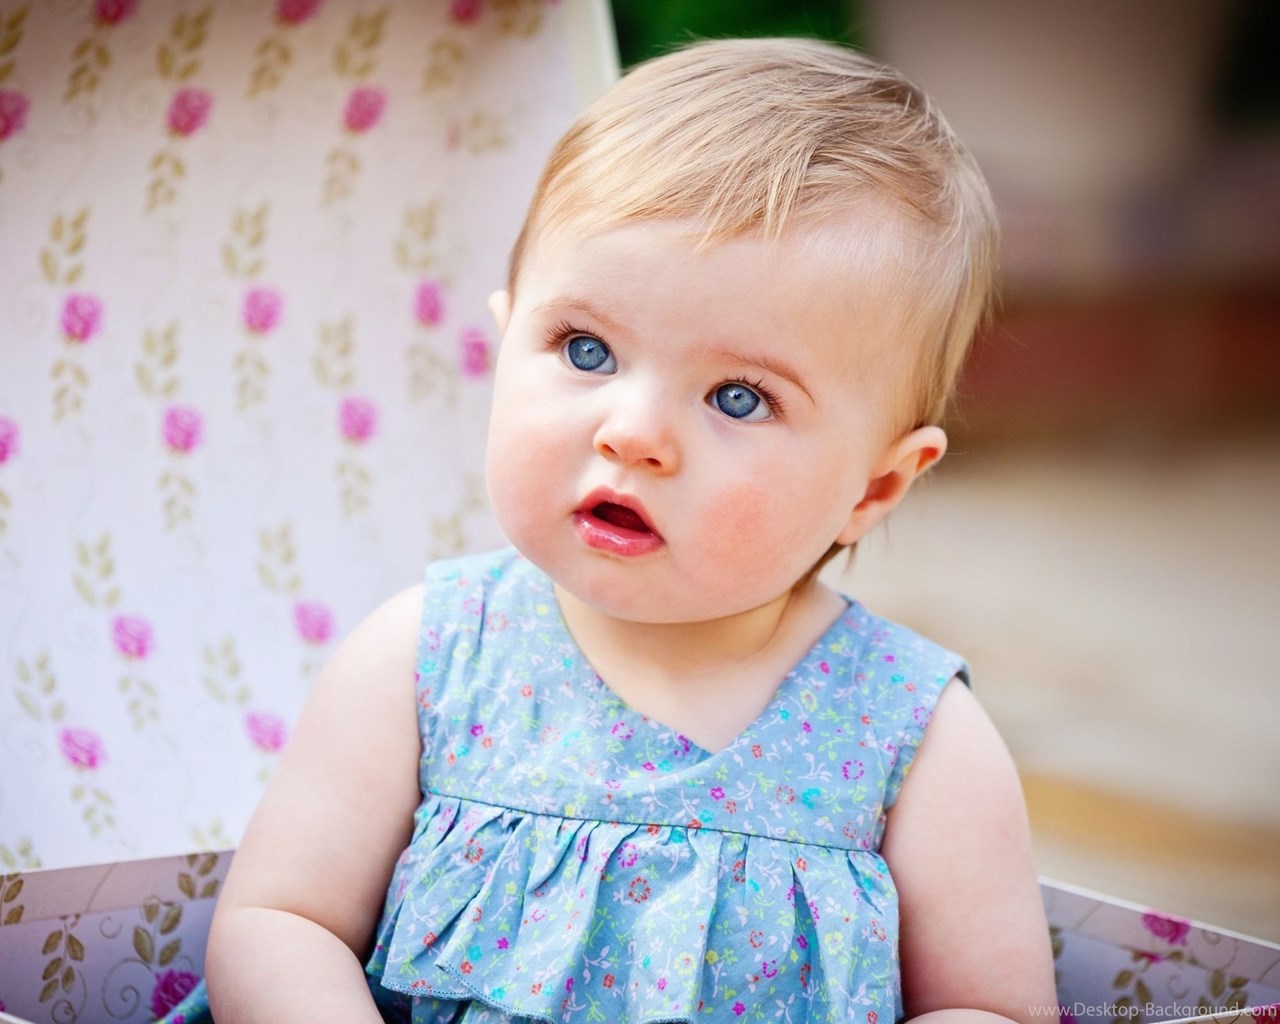 Widescreen - Funny Cute Baby Images Hd , HD Wallpaper & Backgrounds